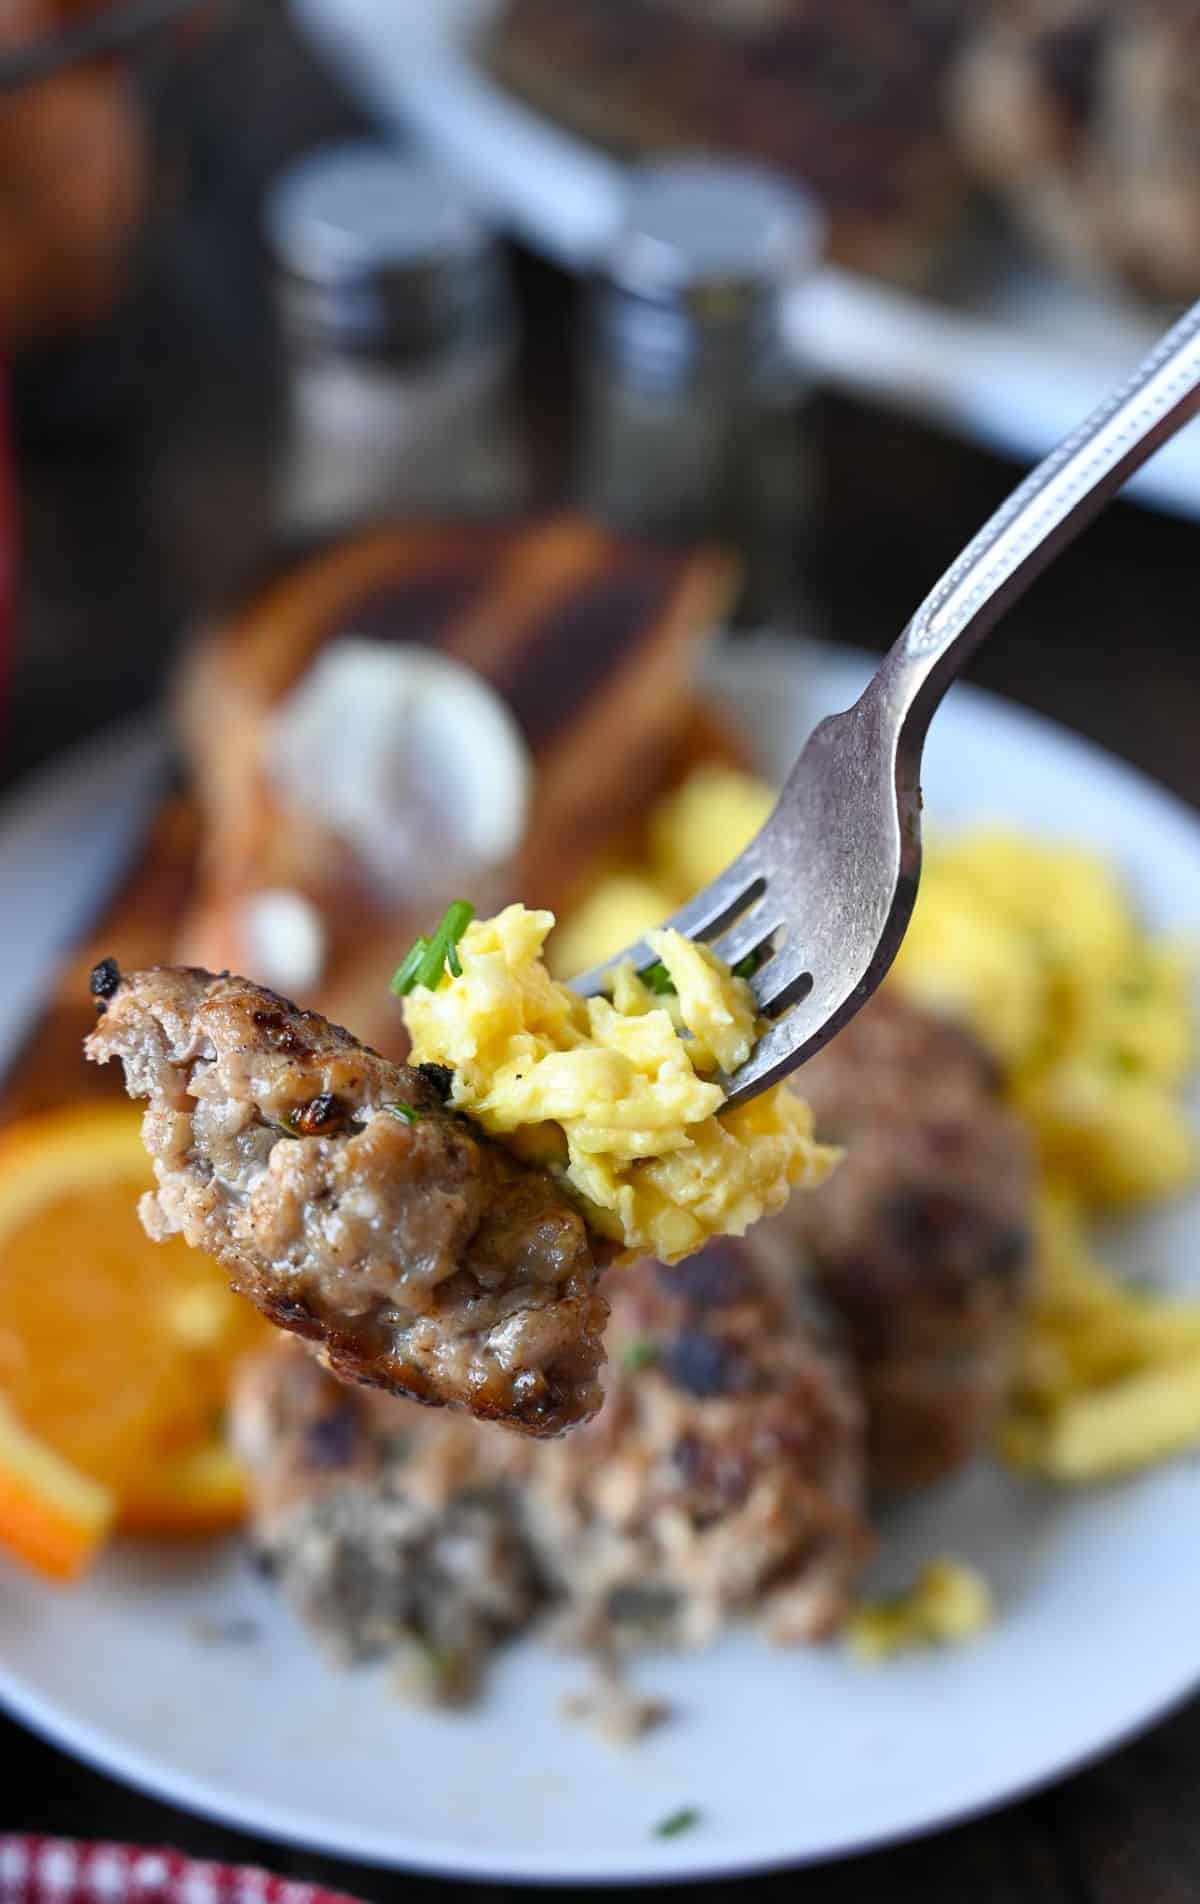 A bite od sausage and eggs on a fork.